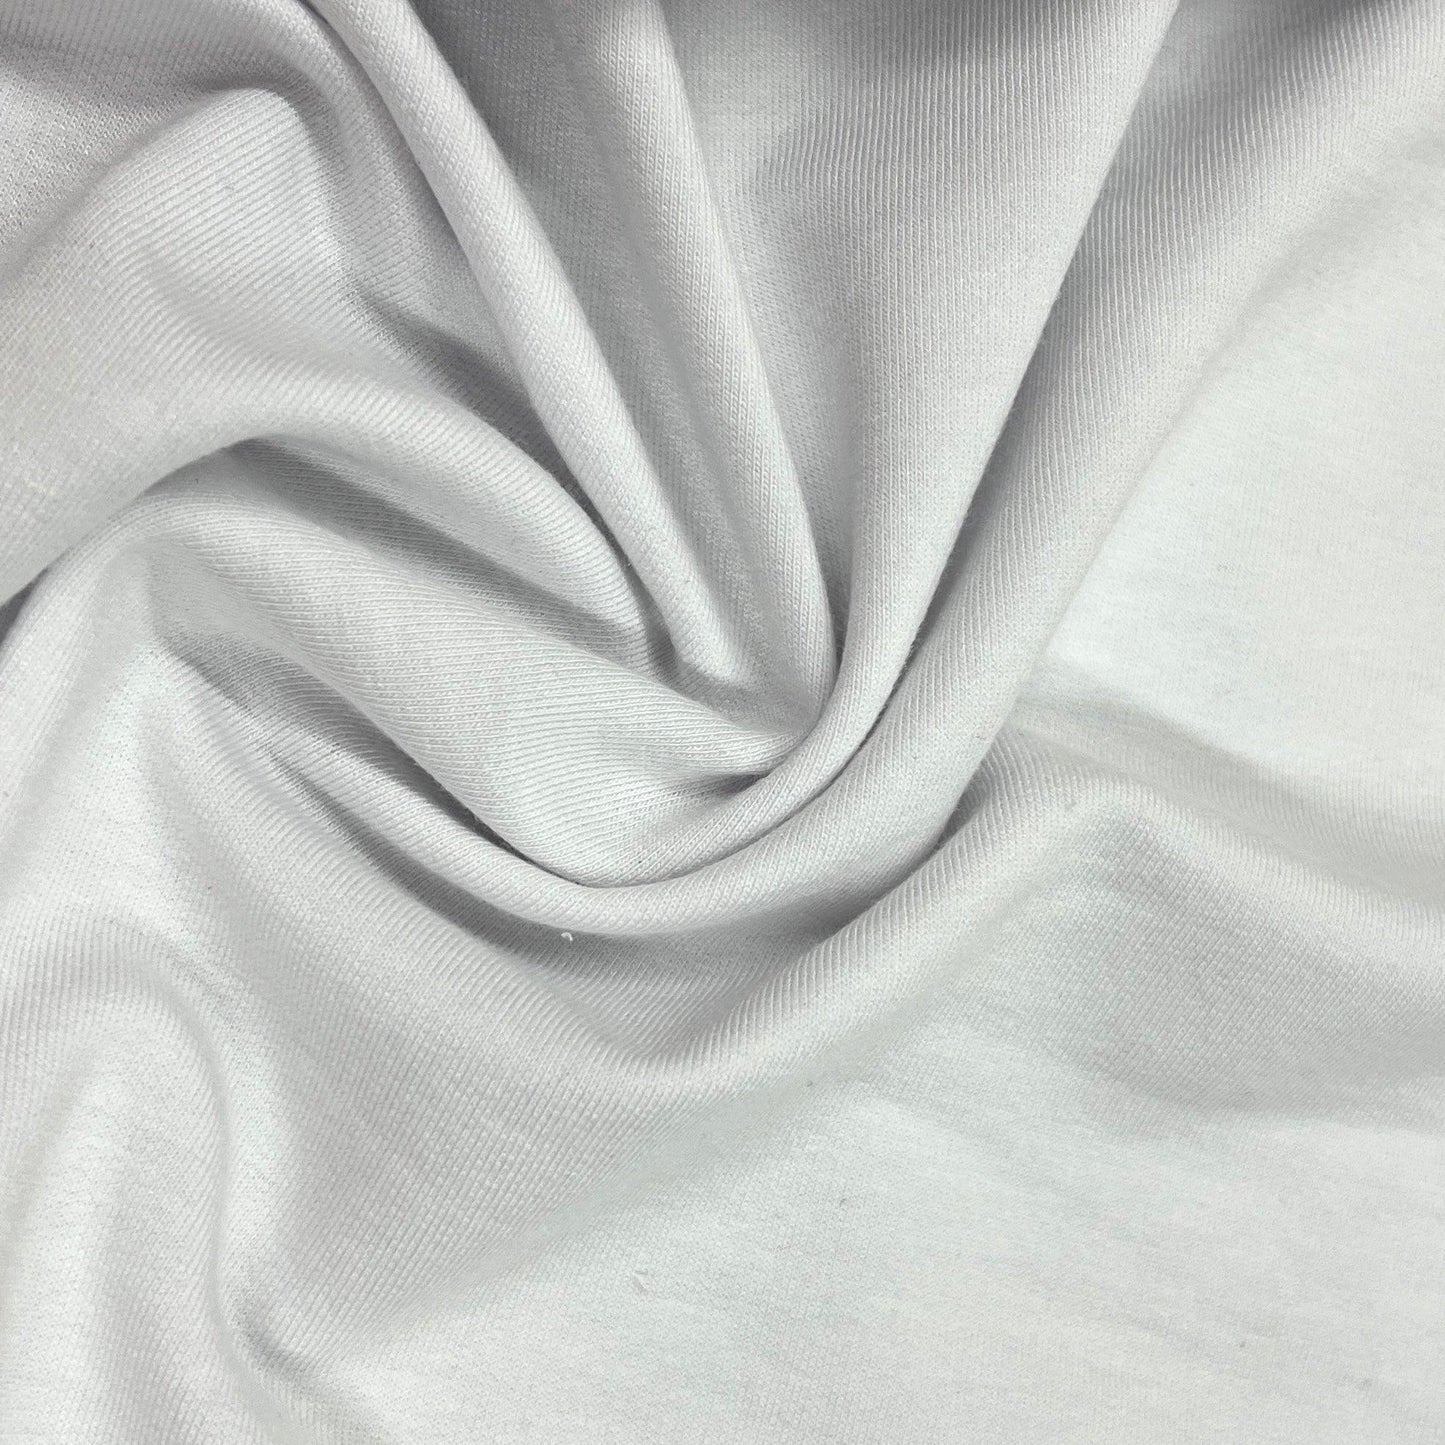 White Bamboo Stretch French Terry Fabric - 380 GSM - Knit in the USA - Nature's Fabrics